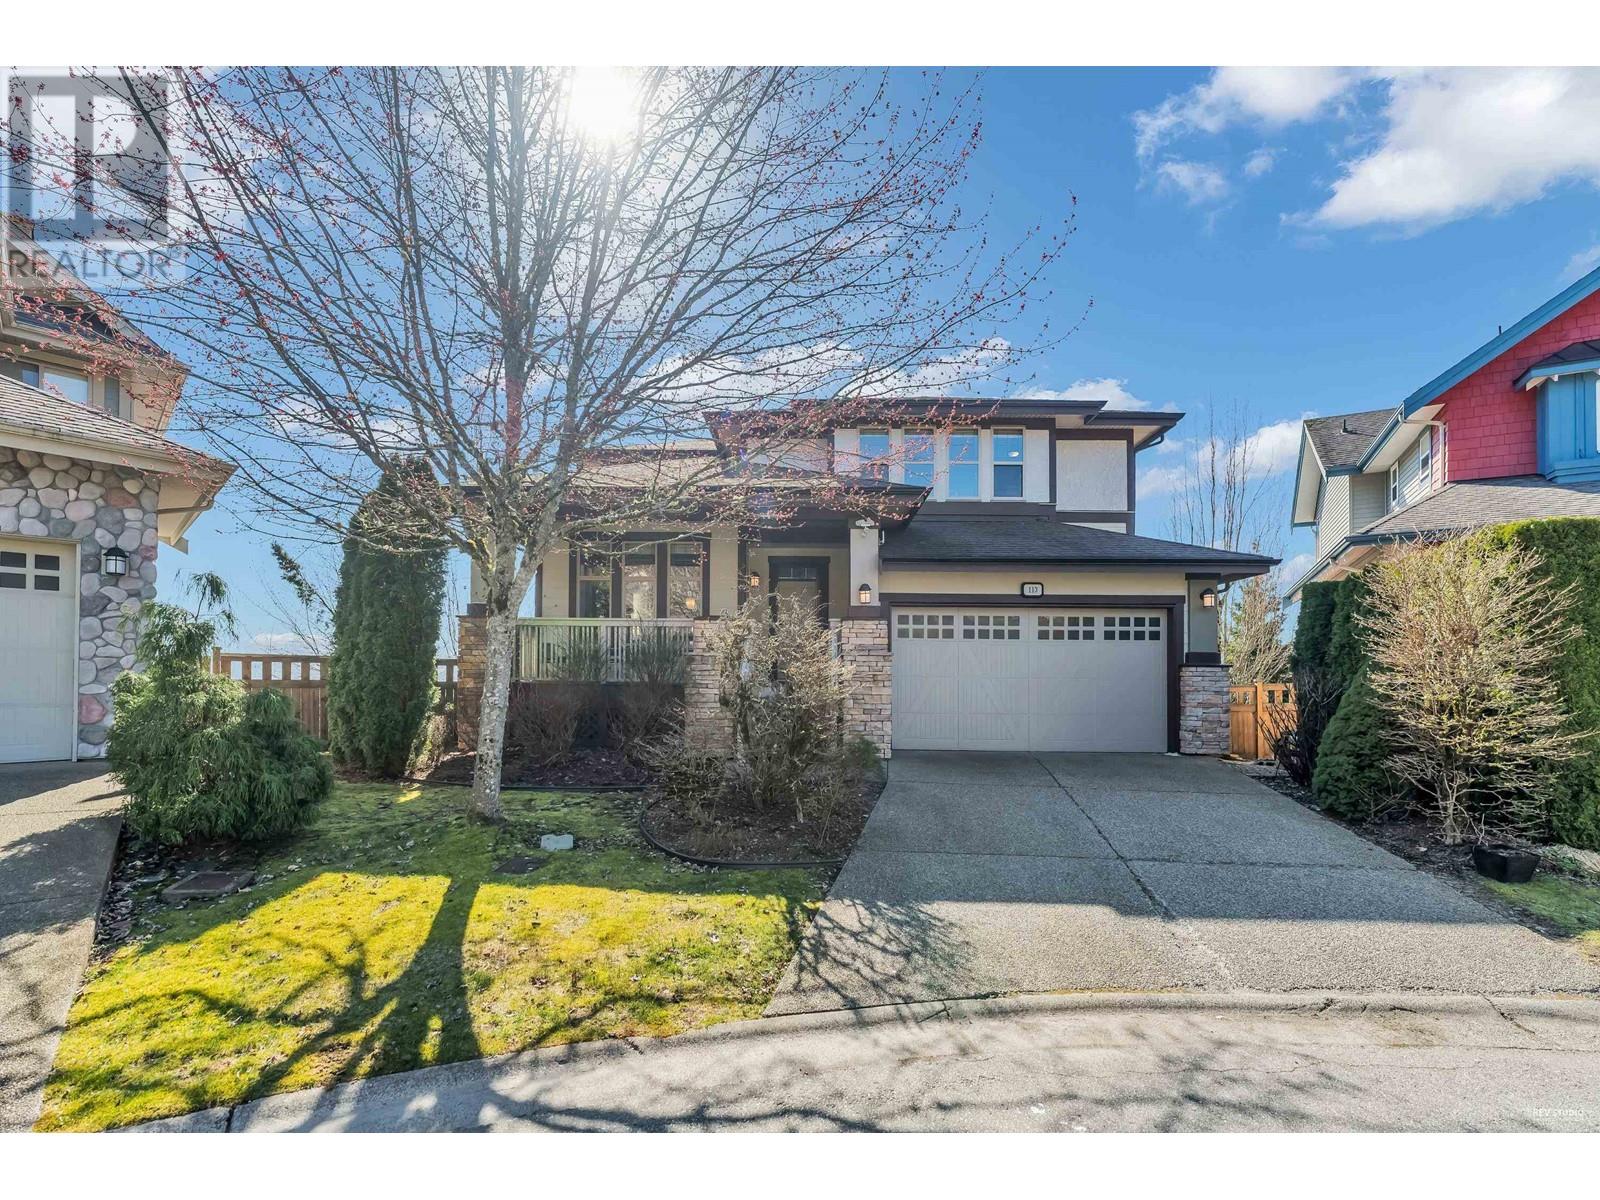 113 CRANBERRY COURT located in Port Moody, British Columbia